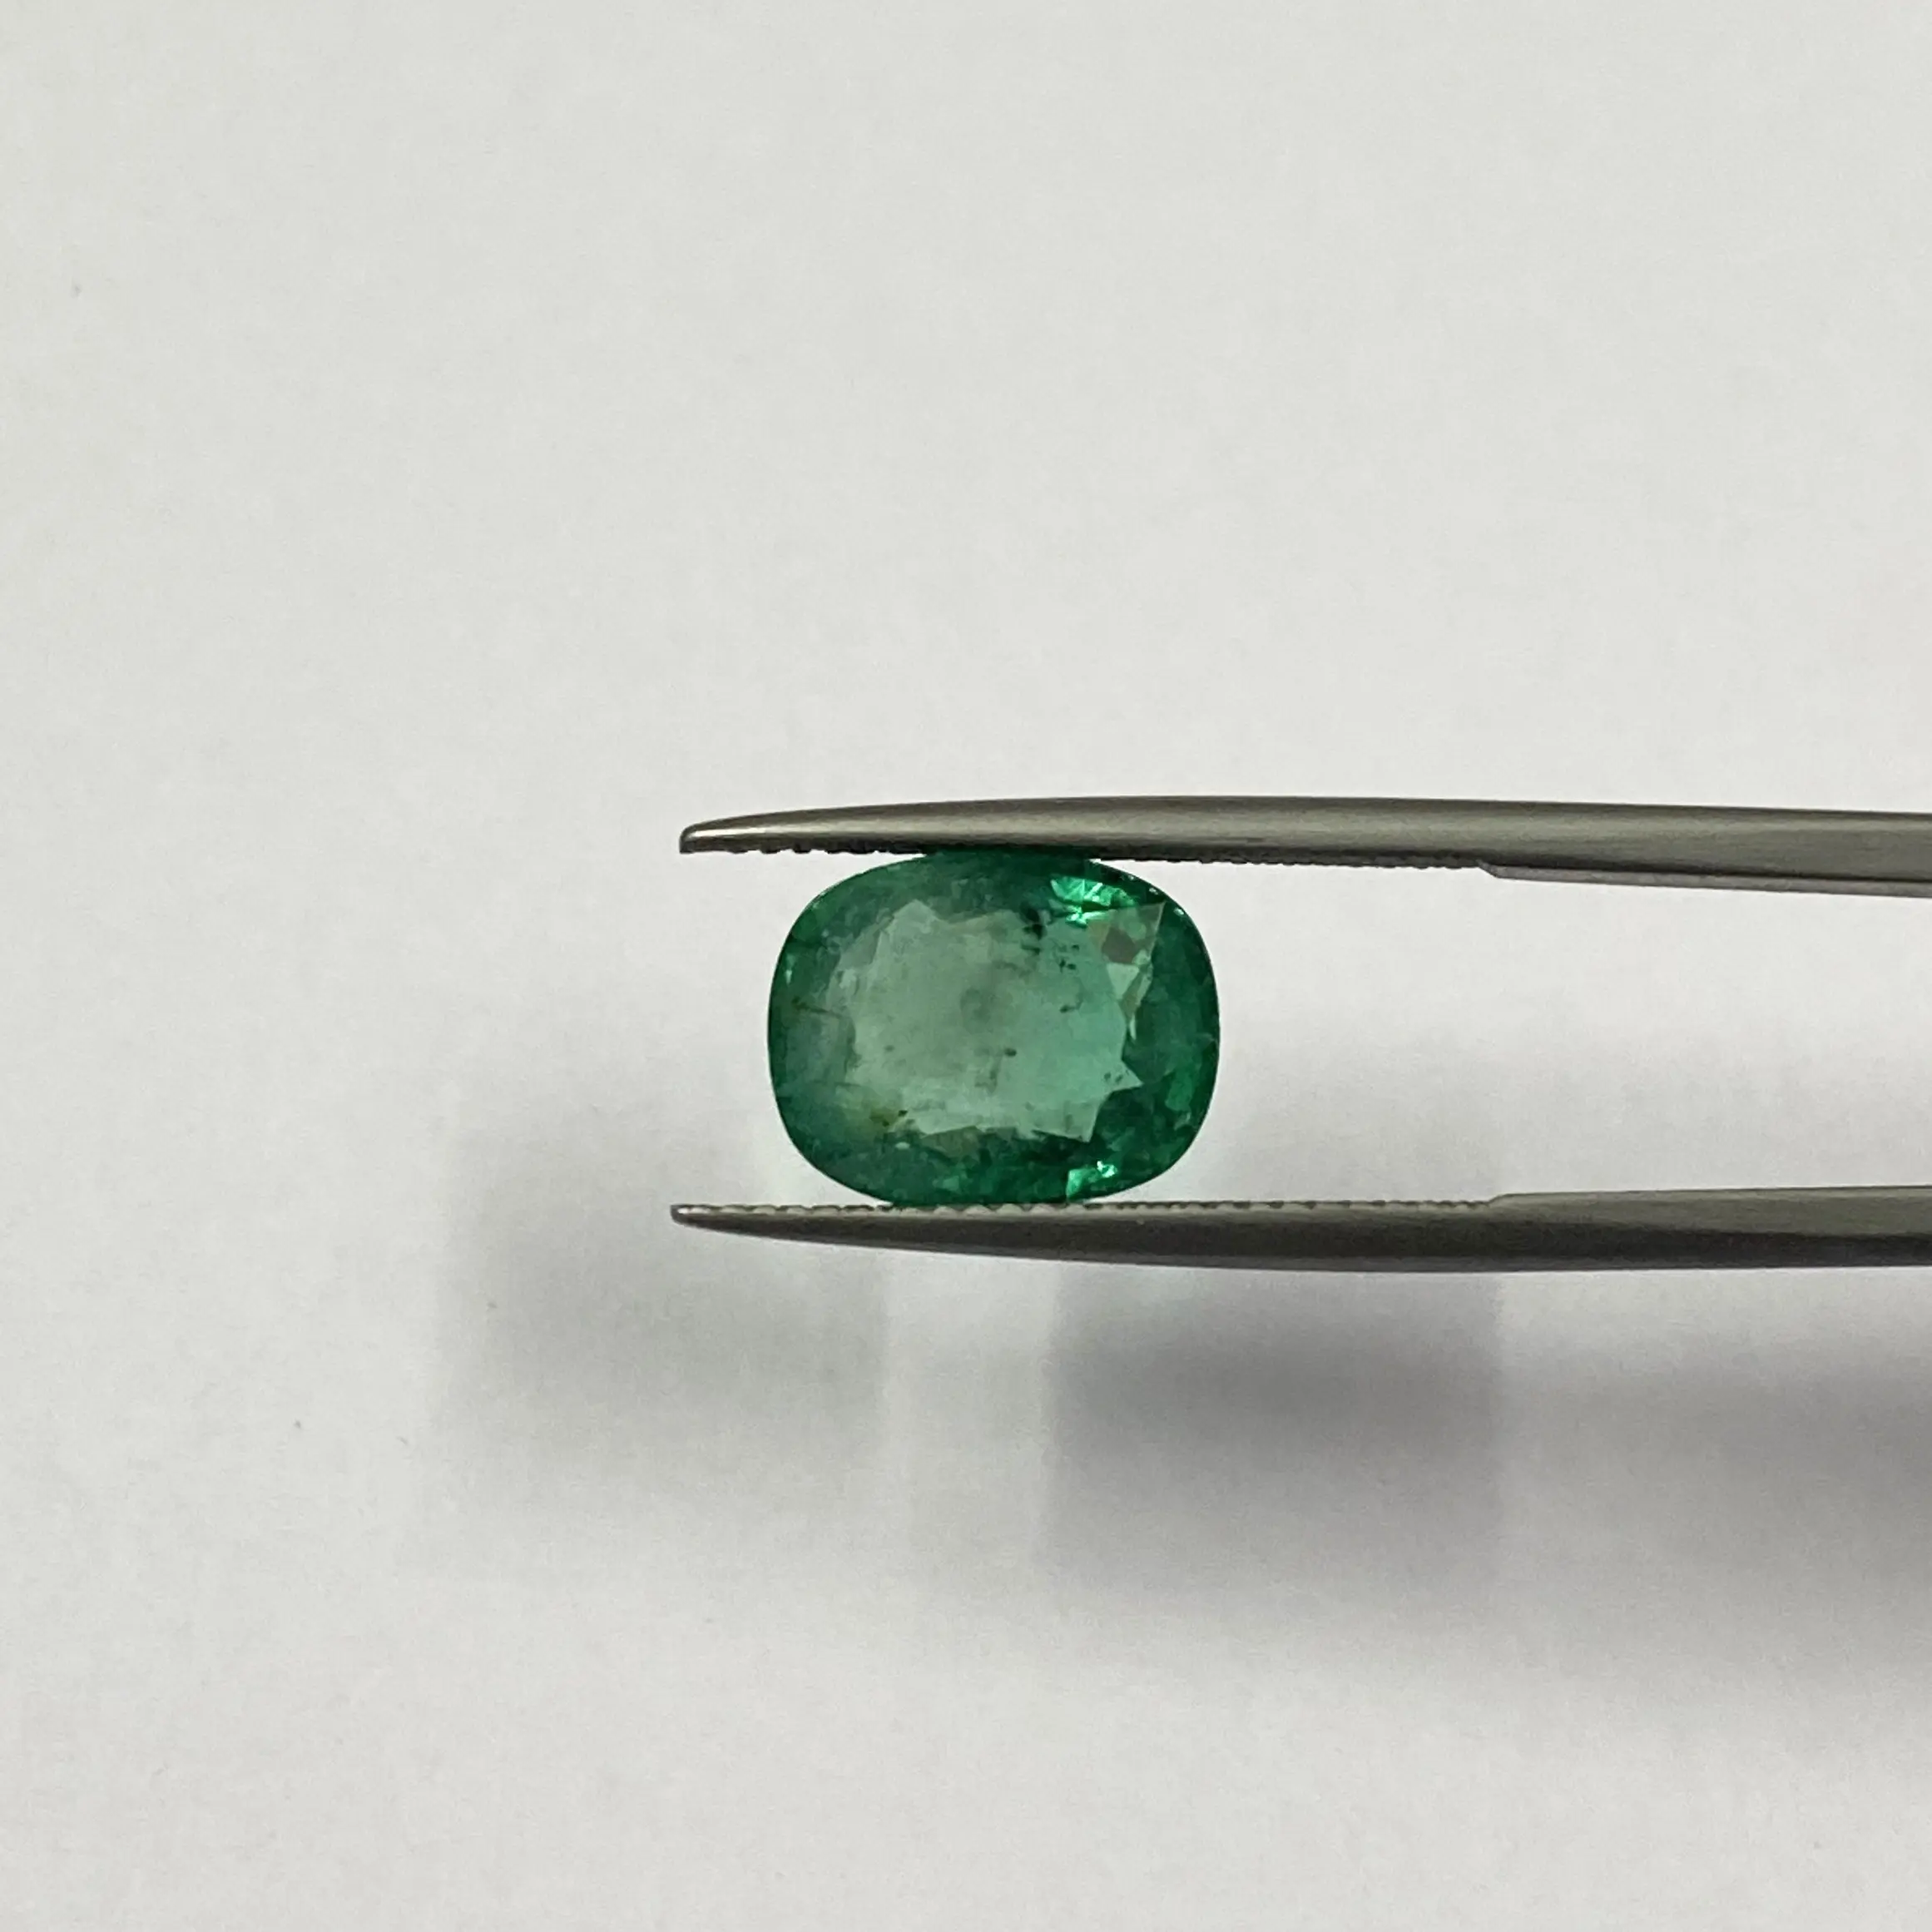 Ready To Ship Good Quality Certified Natural Zambian Emerald Cushion Cut High Luster Gemstone For Ring At Wholesale Price